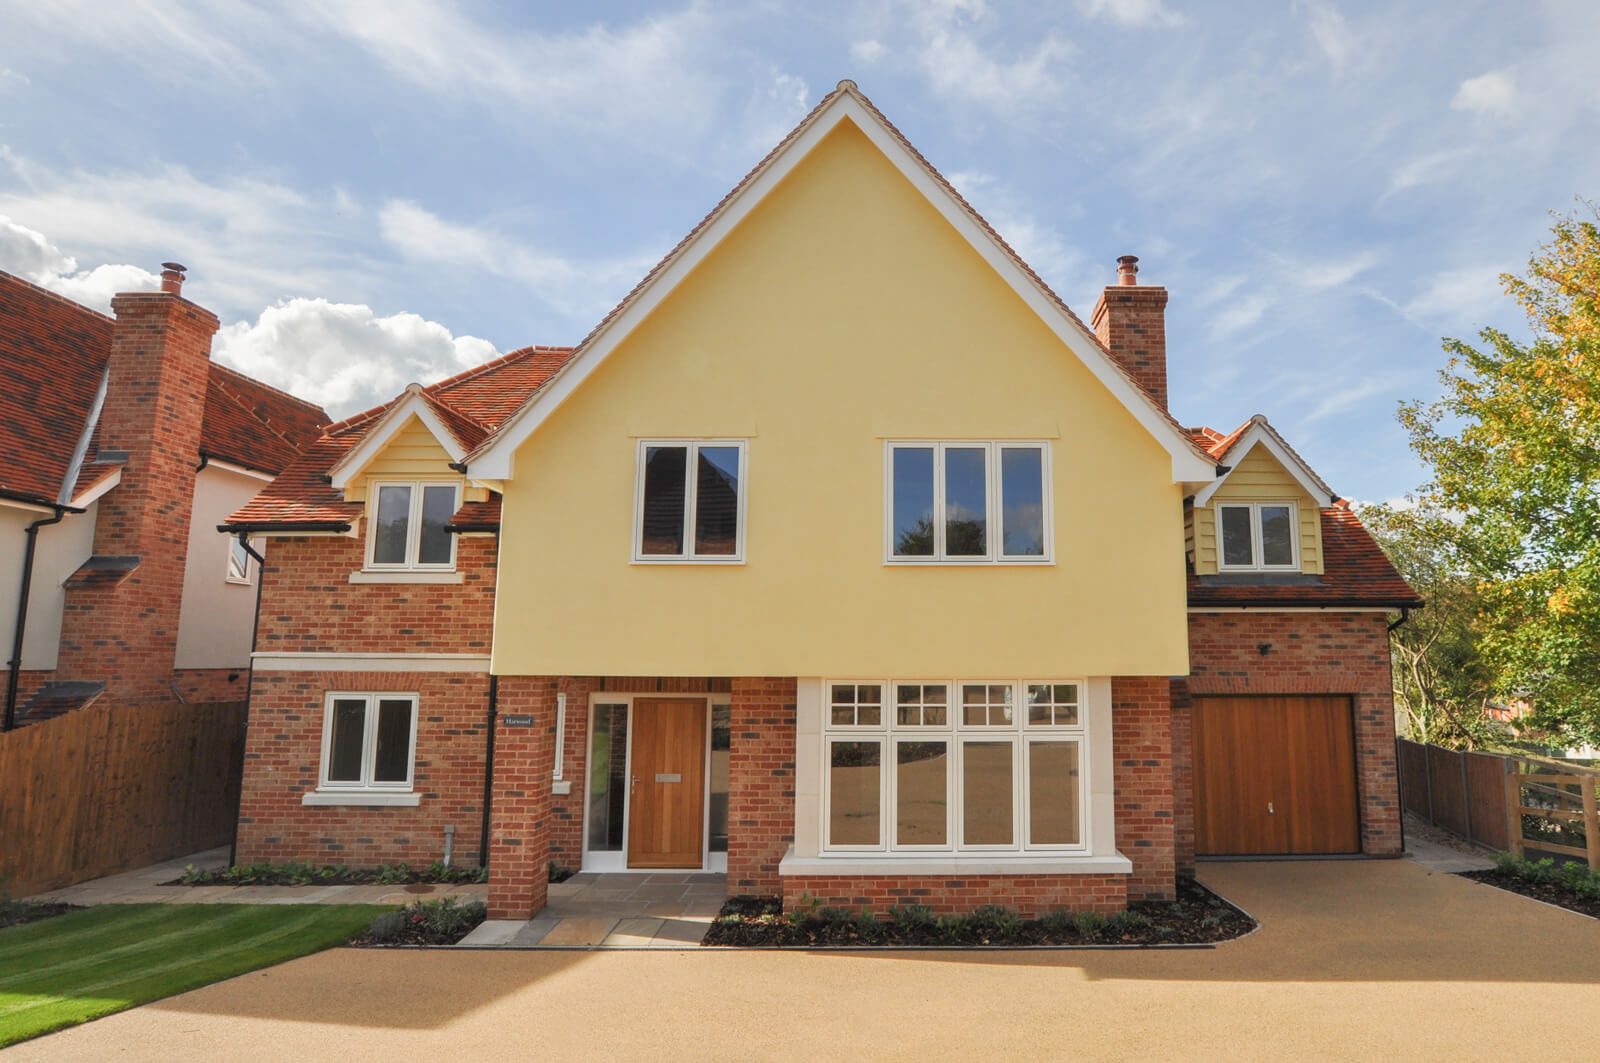 The front view of Harwood, a four-bed house in our Calvert Close development